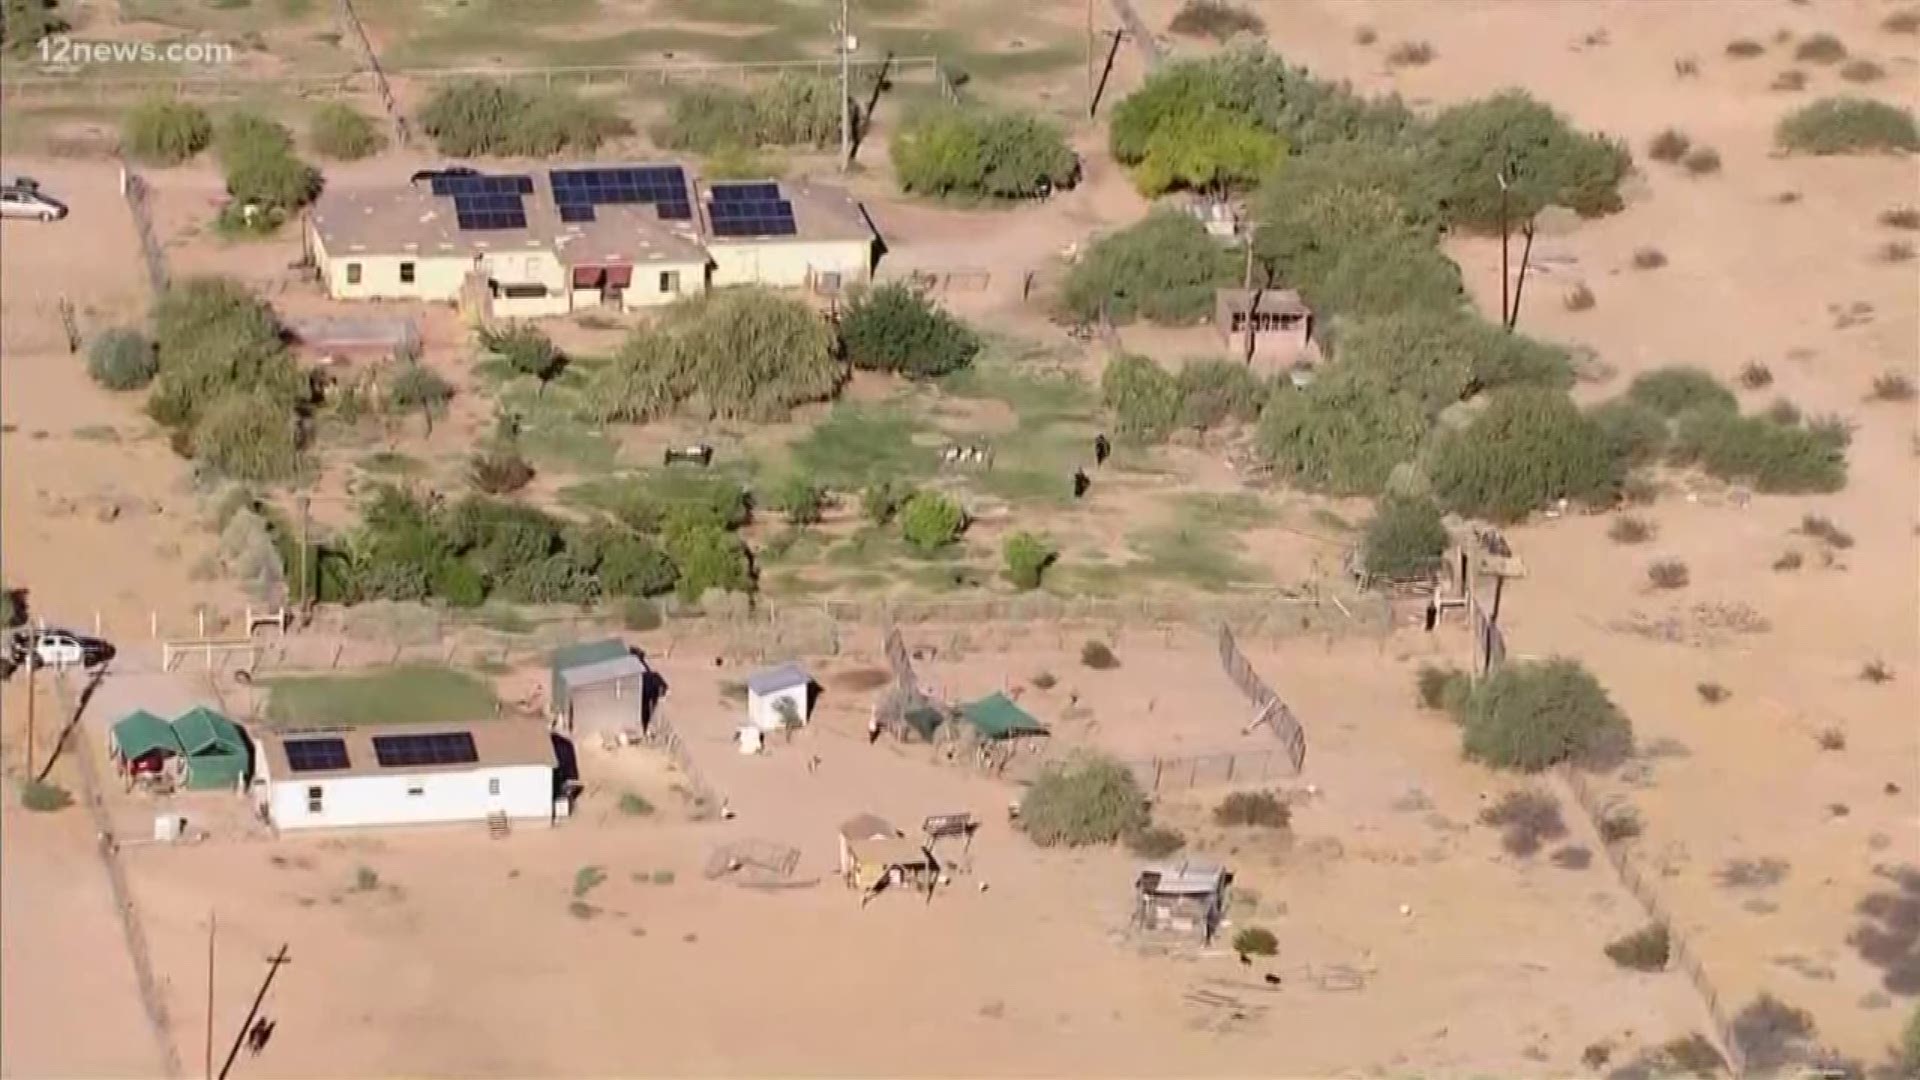 An 8-year-old boy was injured from zip line Monday, according to the Maricopa County Sheriff’s Office. Sky 12 showed police tape around what appeared to be a backyard zip line.